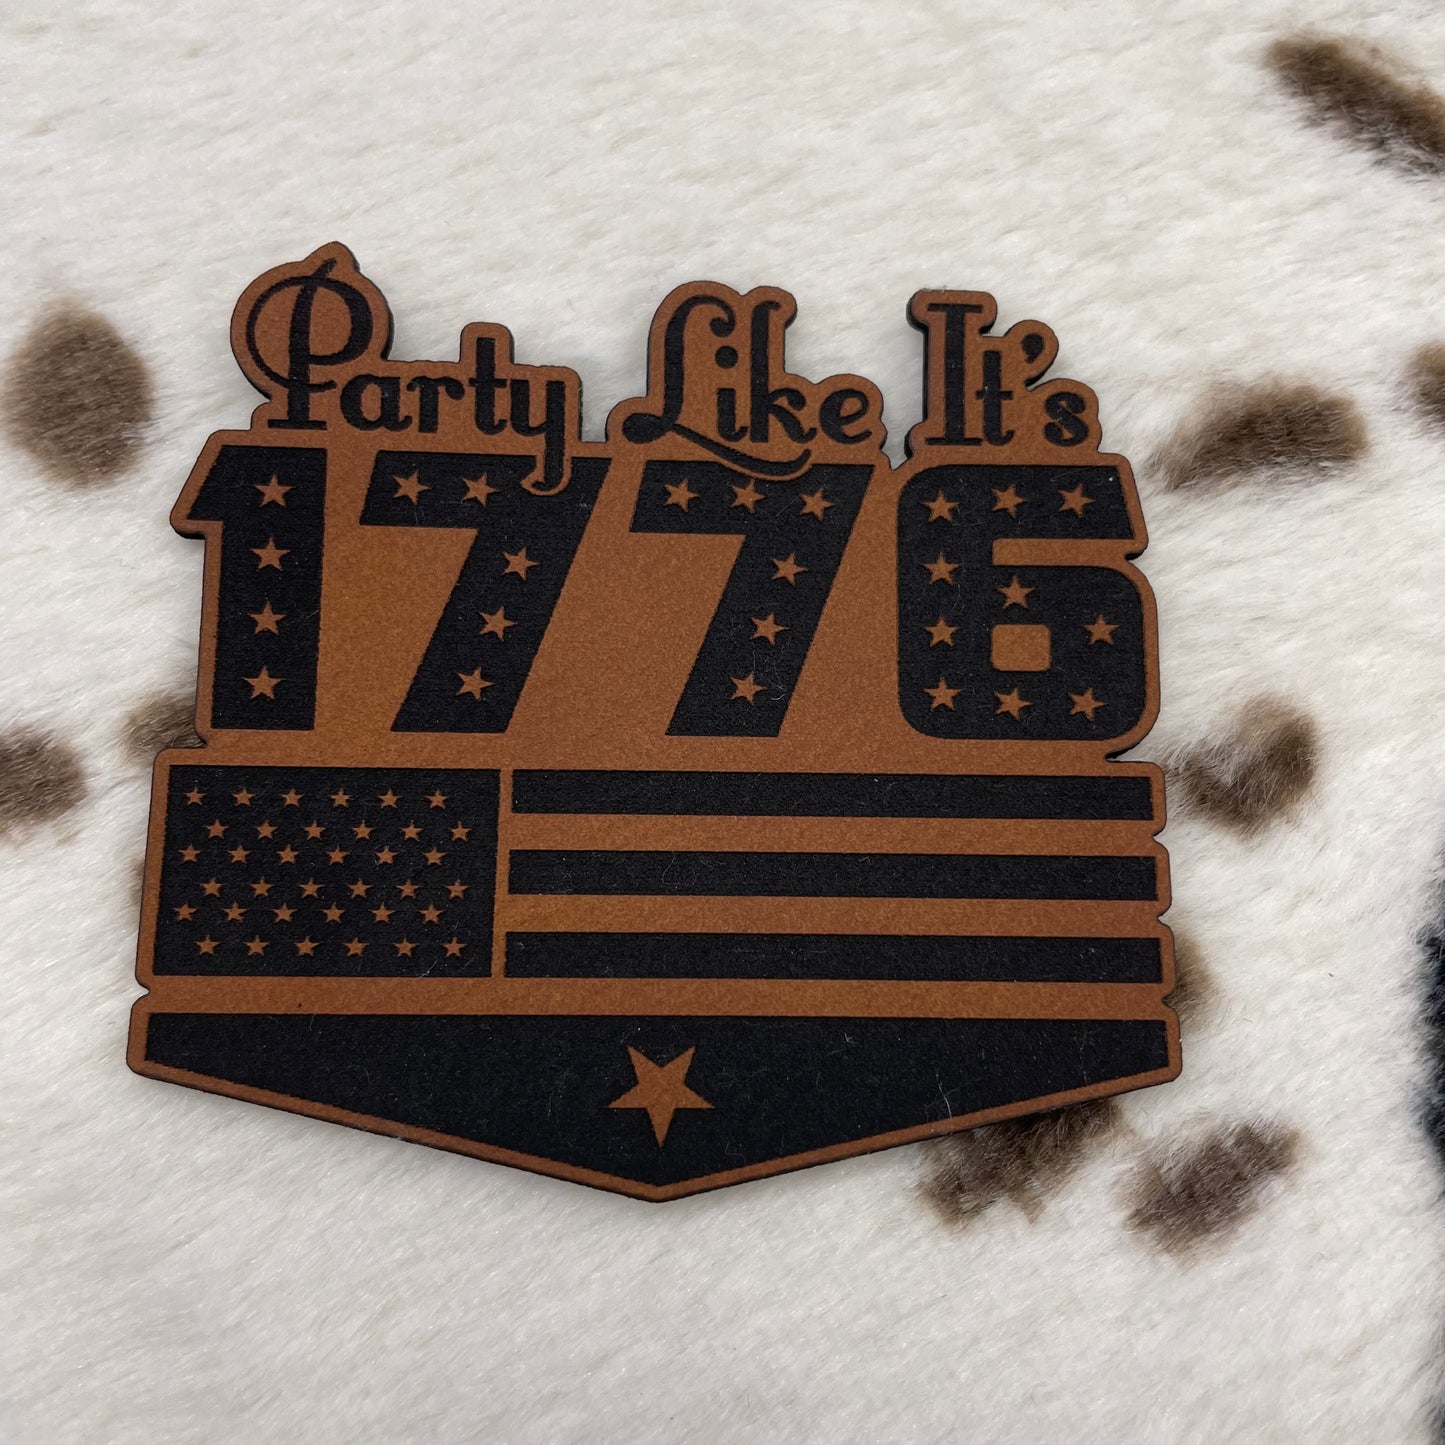 Party Like it's 1776- 2.45” wide x 2.25" tall Leatherette Patch